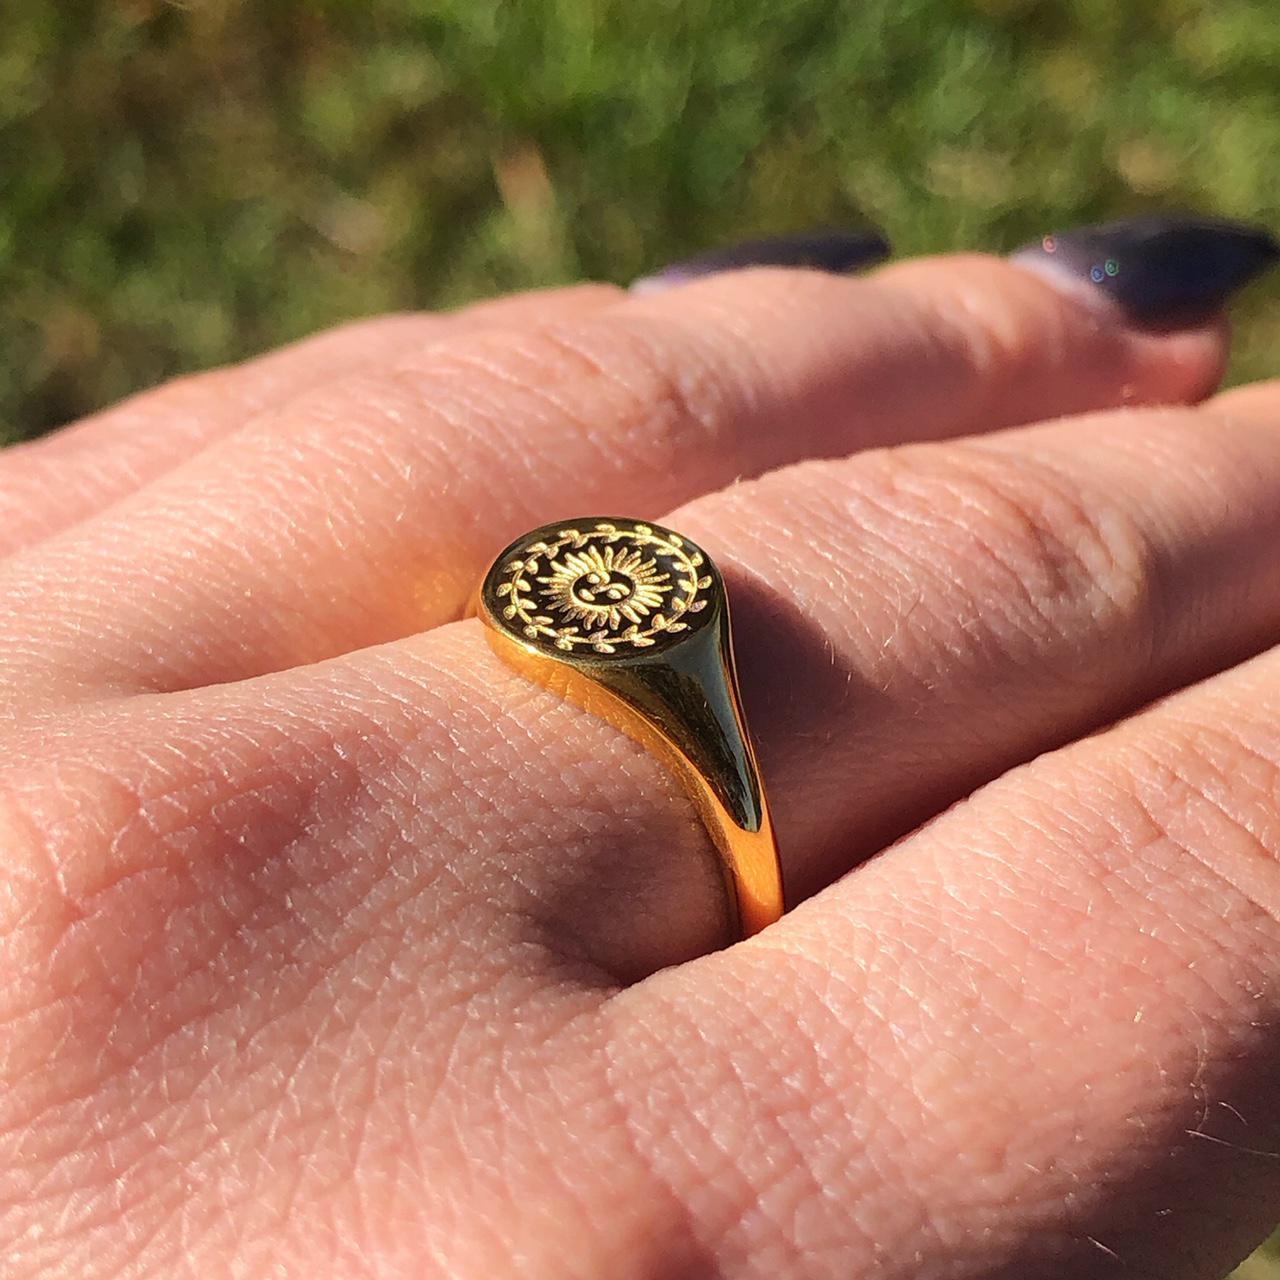 Product Image 2 - New! “Gia” Sun Gold Ring

Stainless